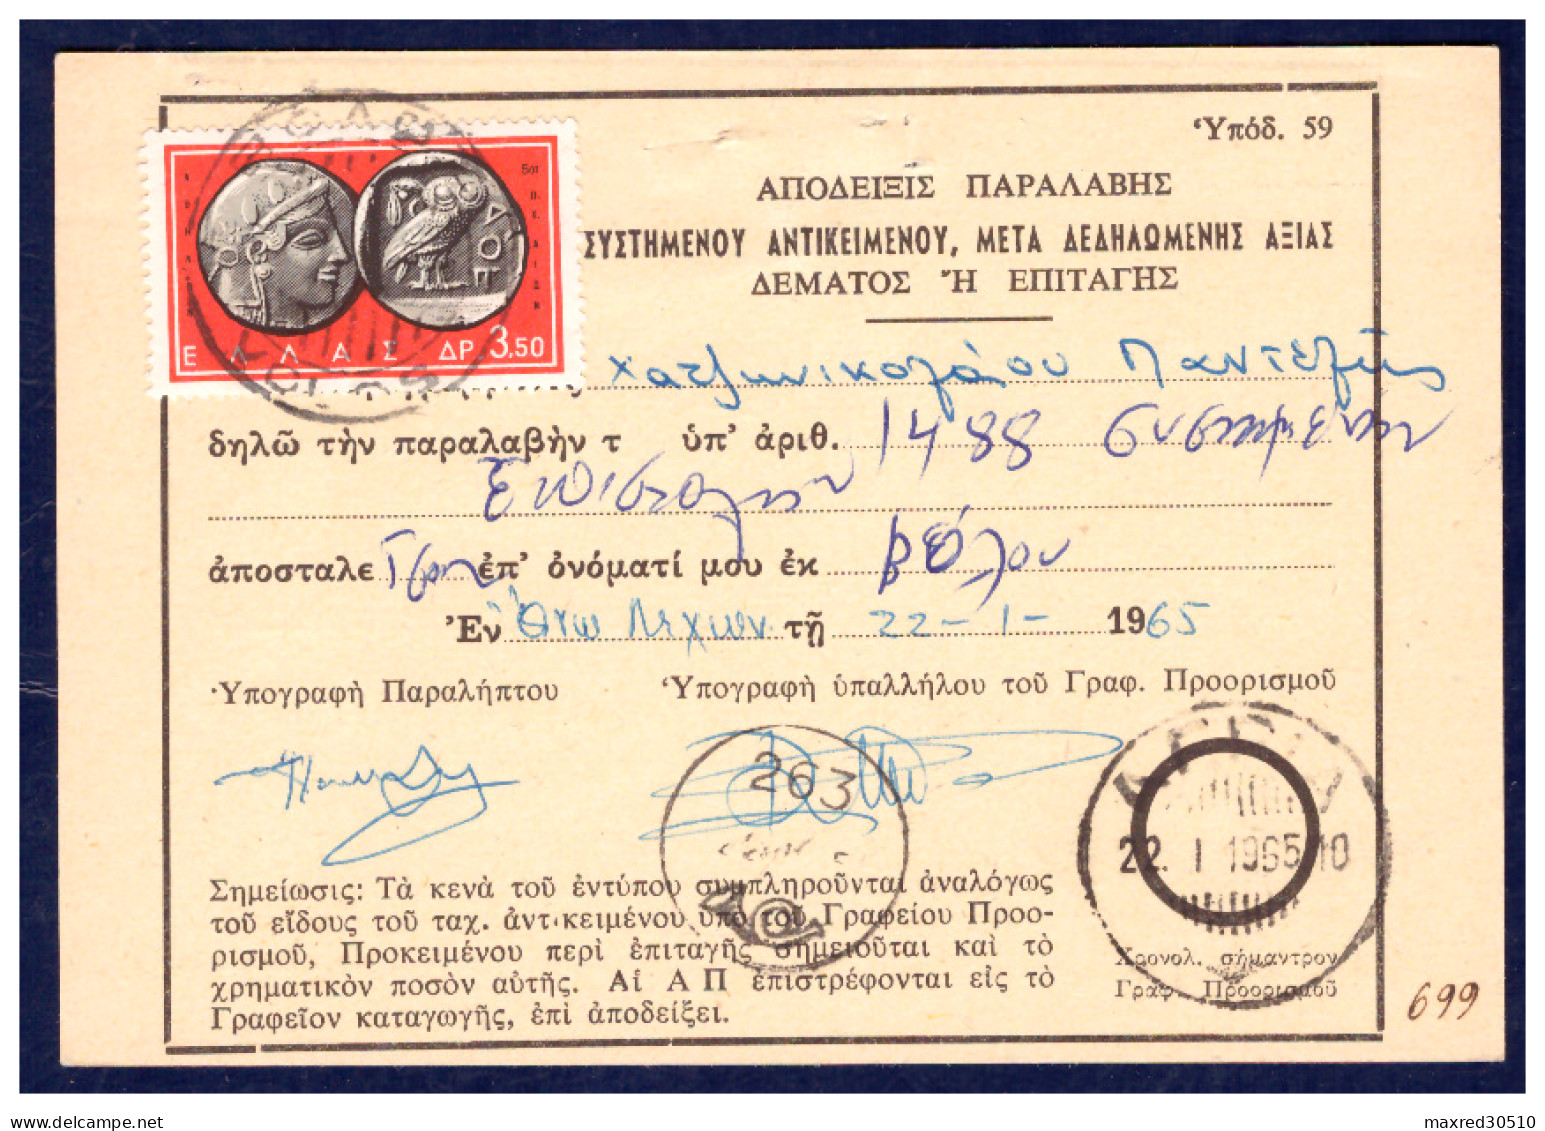 GREECE GREEK RURAL POSTMARK No "263" ANO LECHONIA / AGRIA - MUNICIPALITY OF NEILIAS (MAGNESIA) ON O. P. D. R. - Flammes & Oblitérations